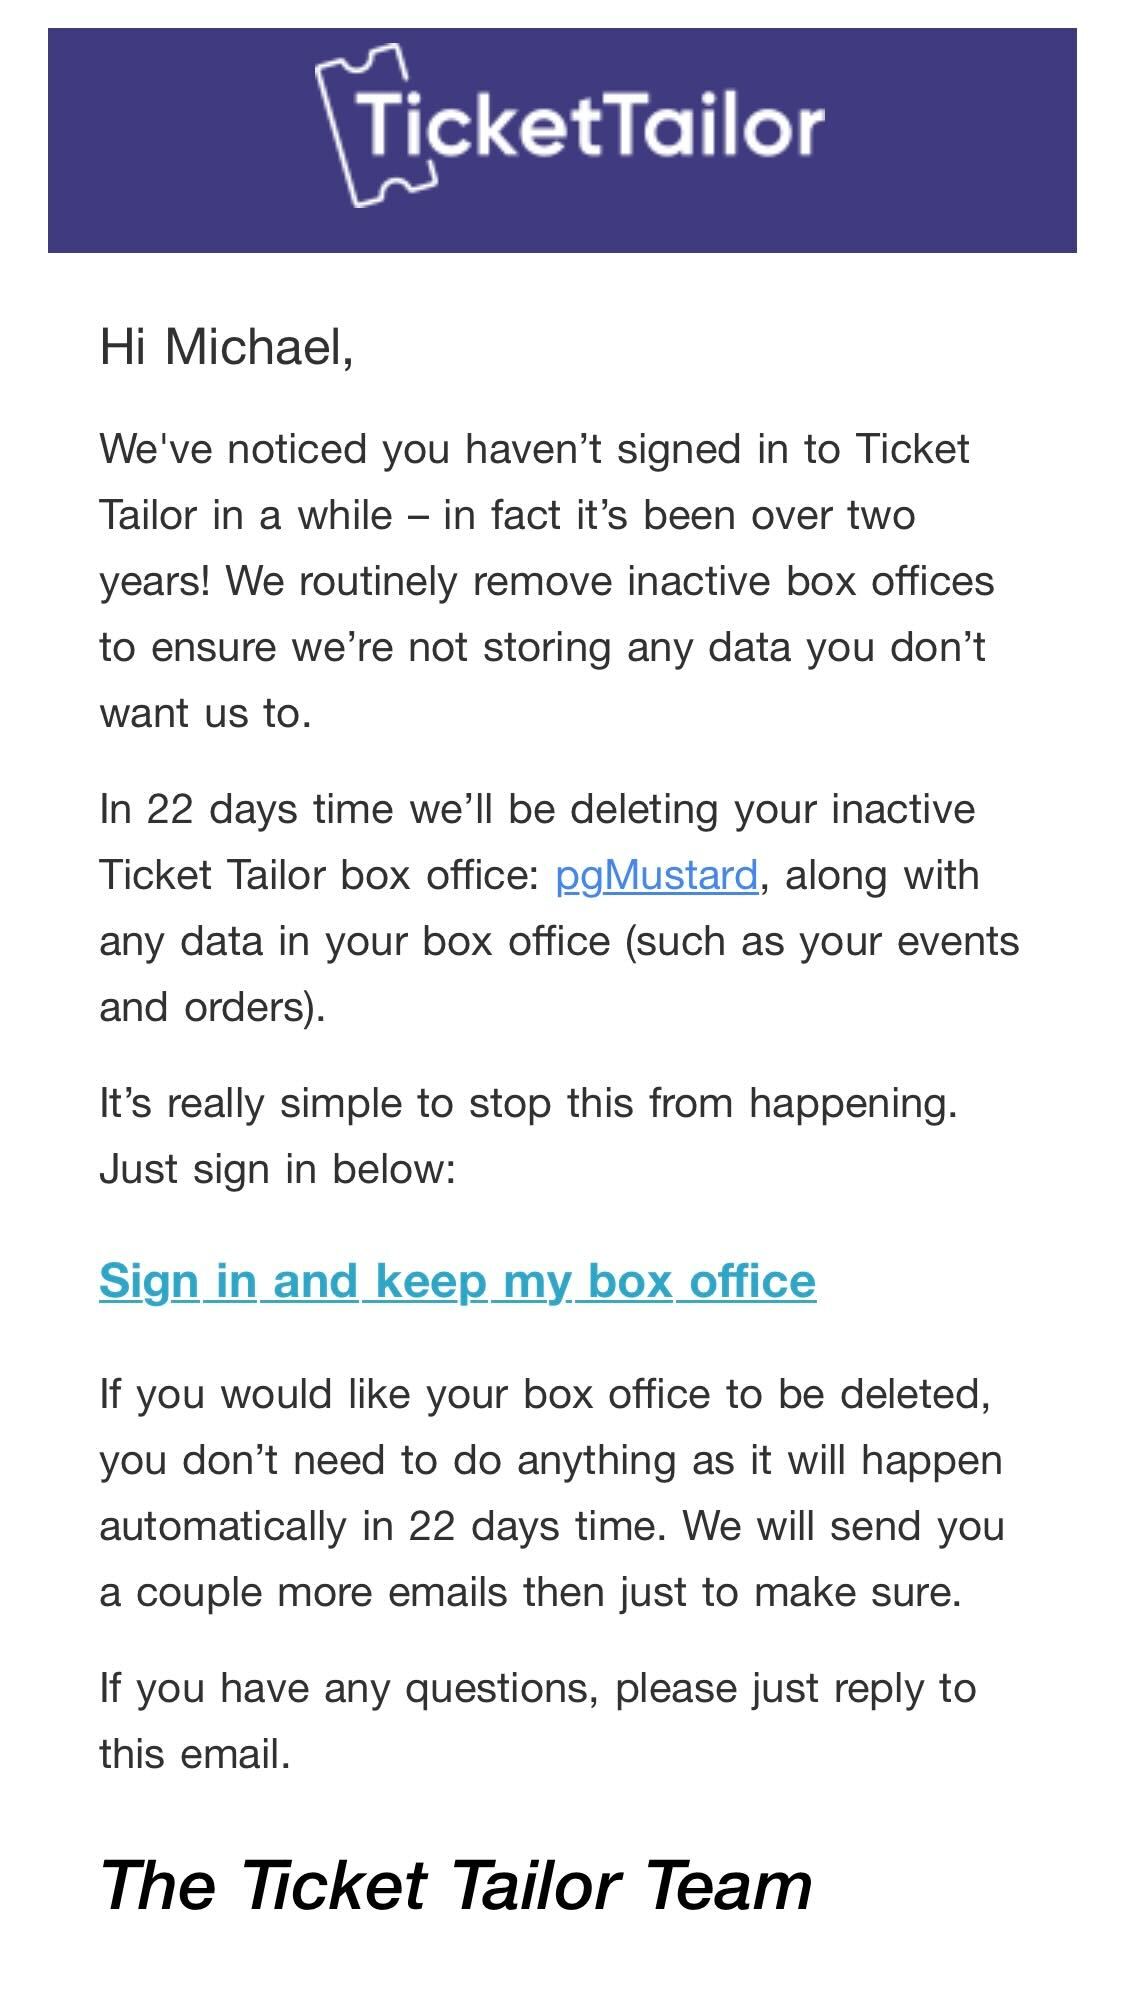 Account Removal Emails: Screenshot of Ticket Tailor's account notification email about pending account deletion